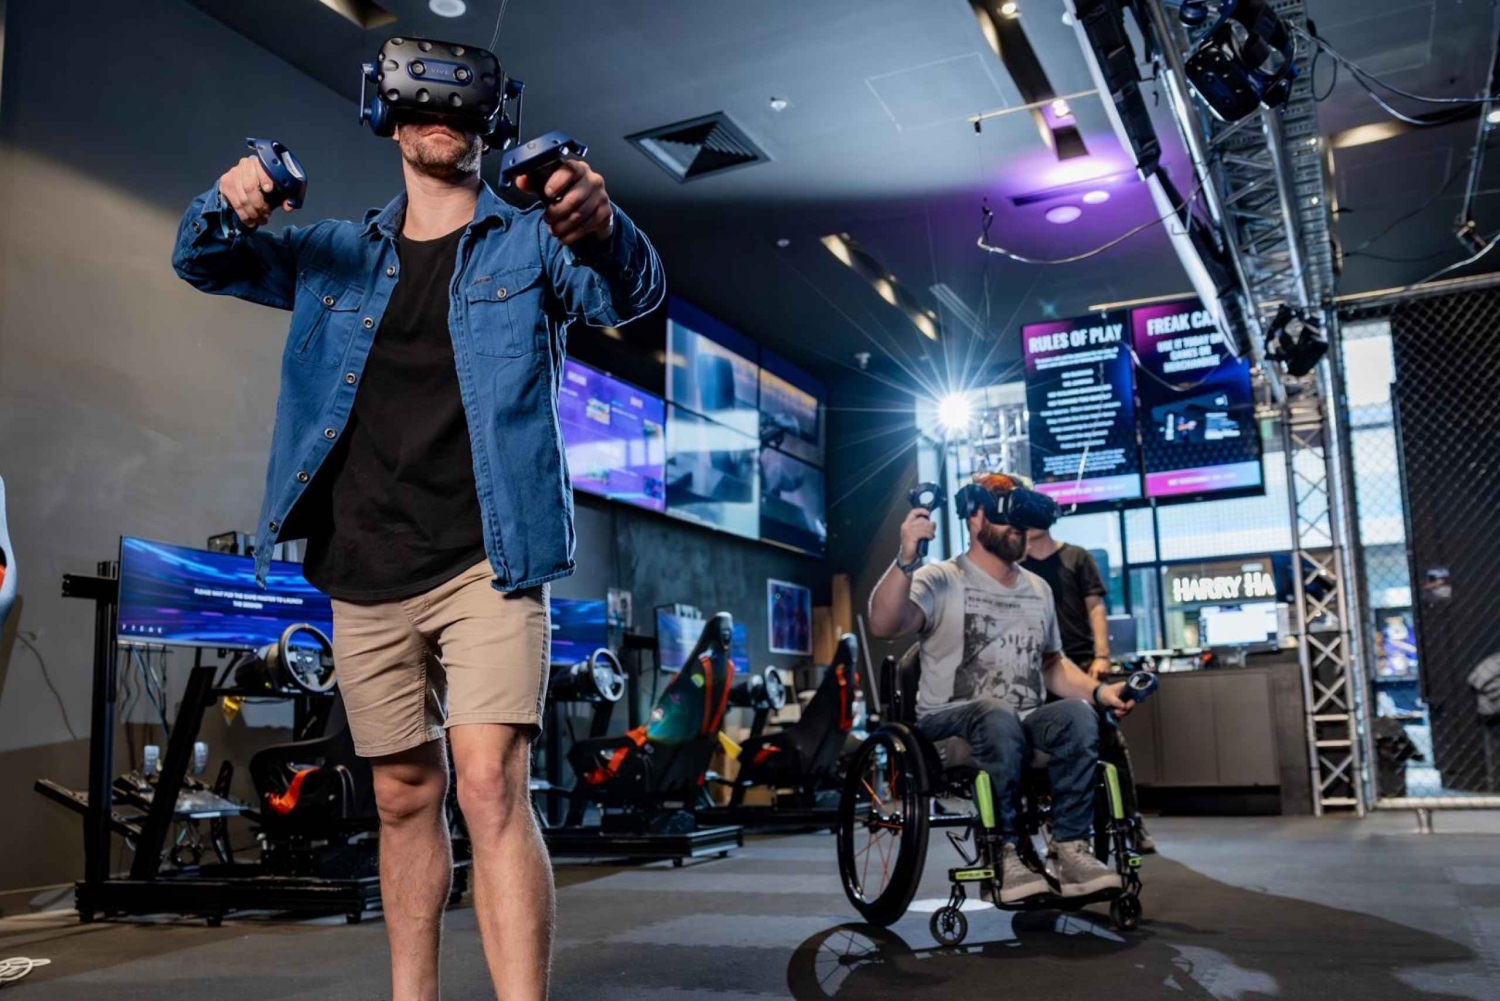 Penrith: 1 times Virtual Reality-arkadeoplevelse